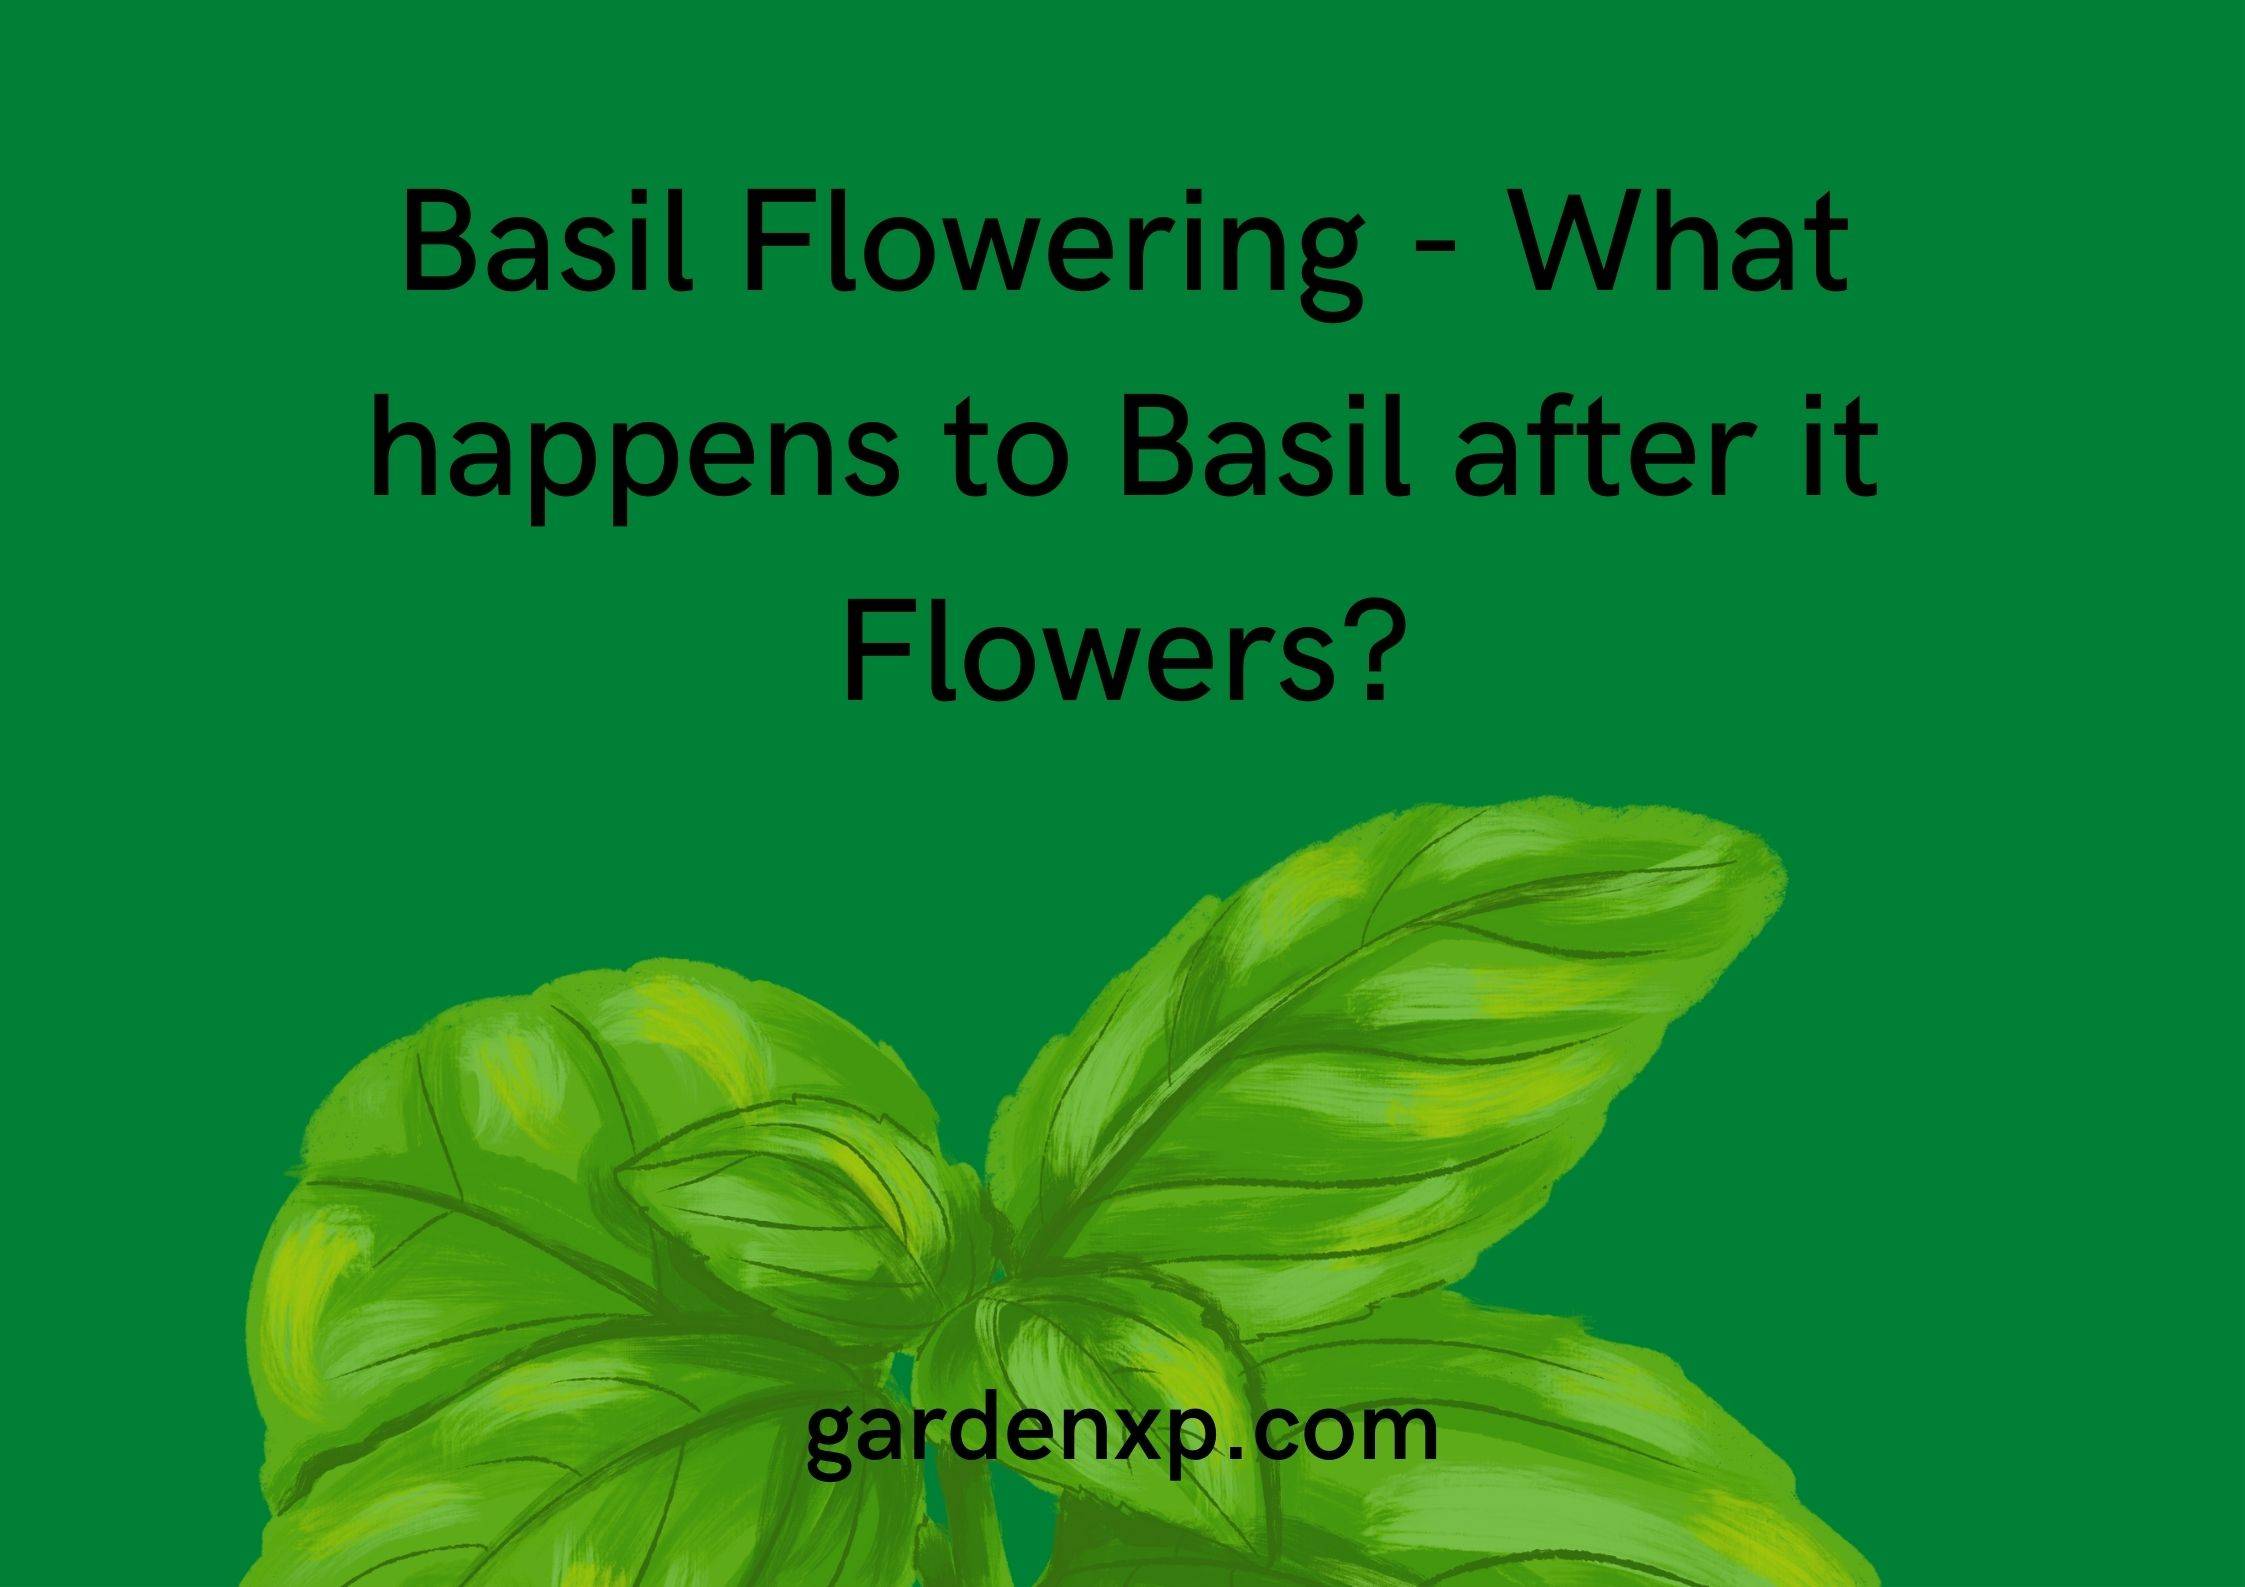 Basil Flowering - What happens to Basil after it Flowers?